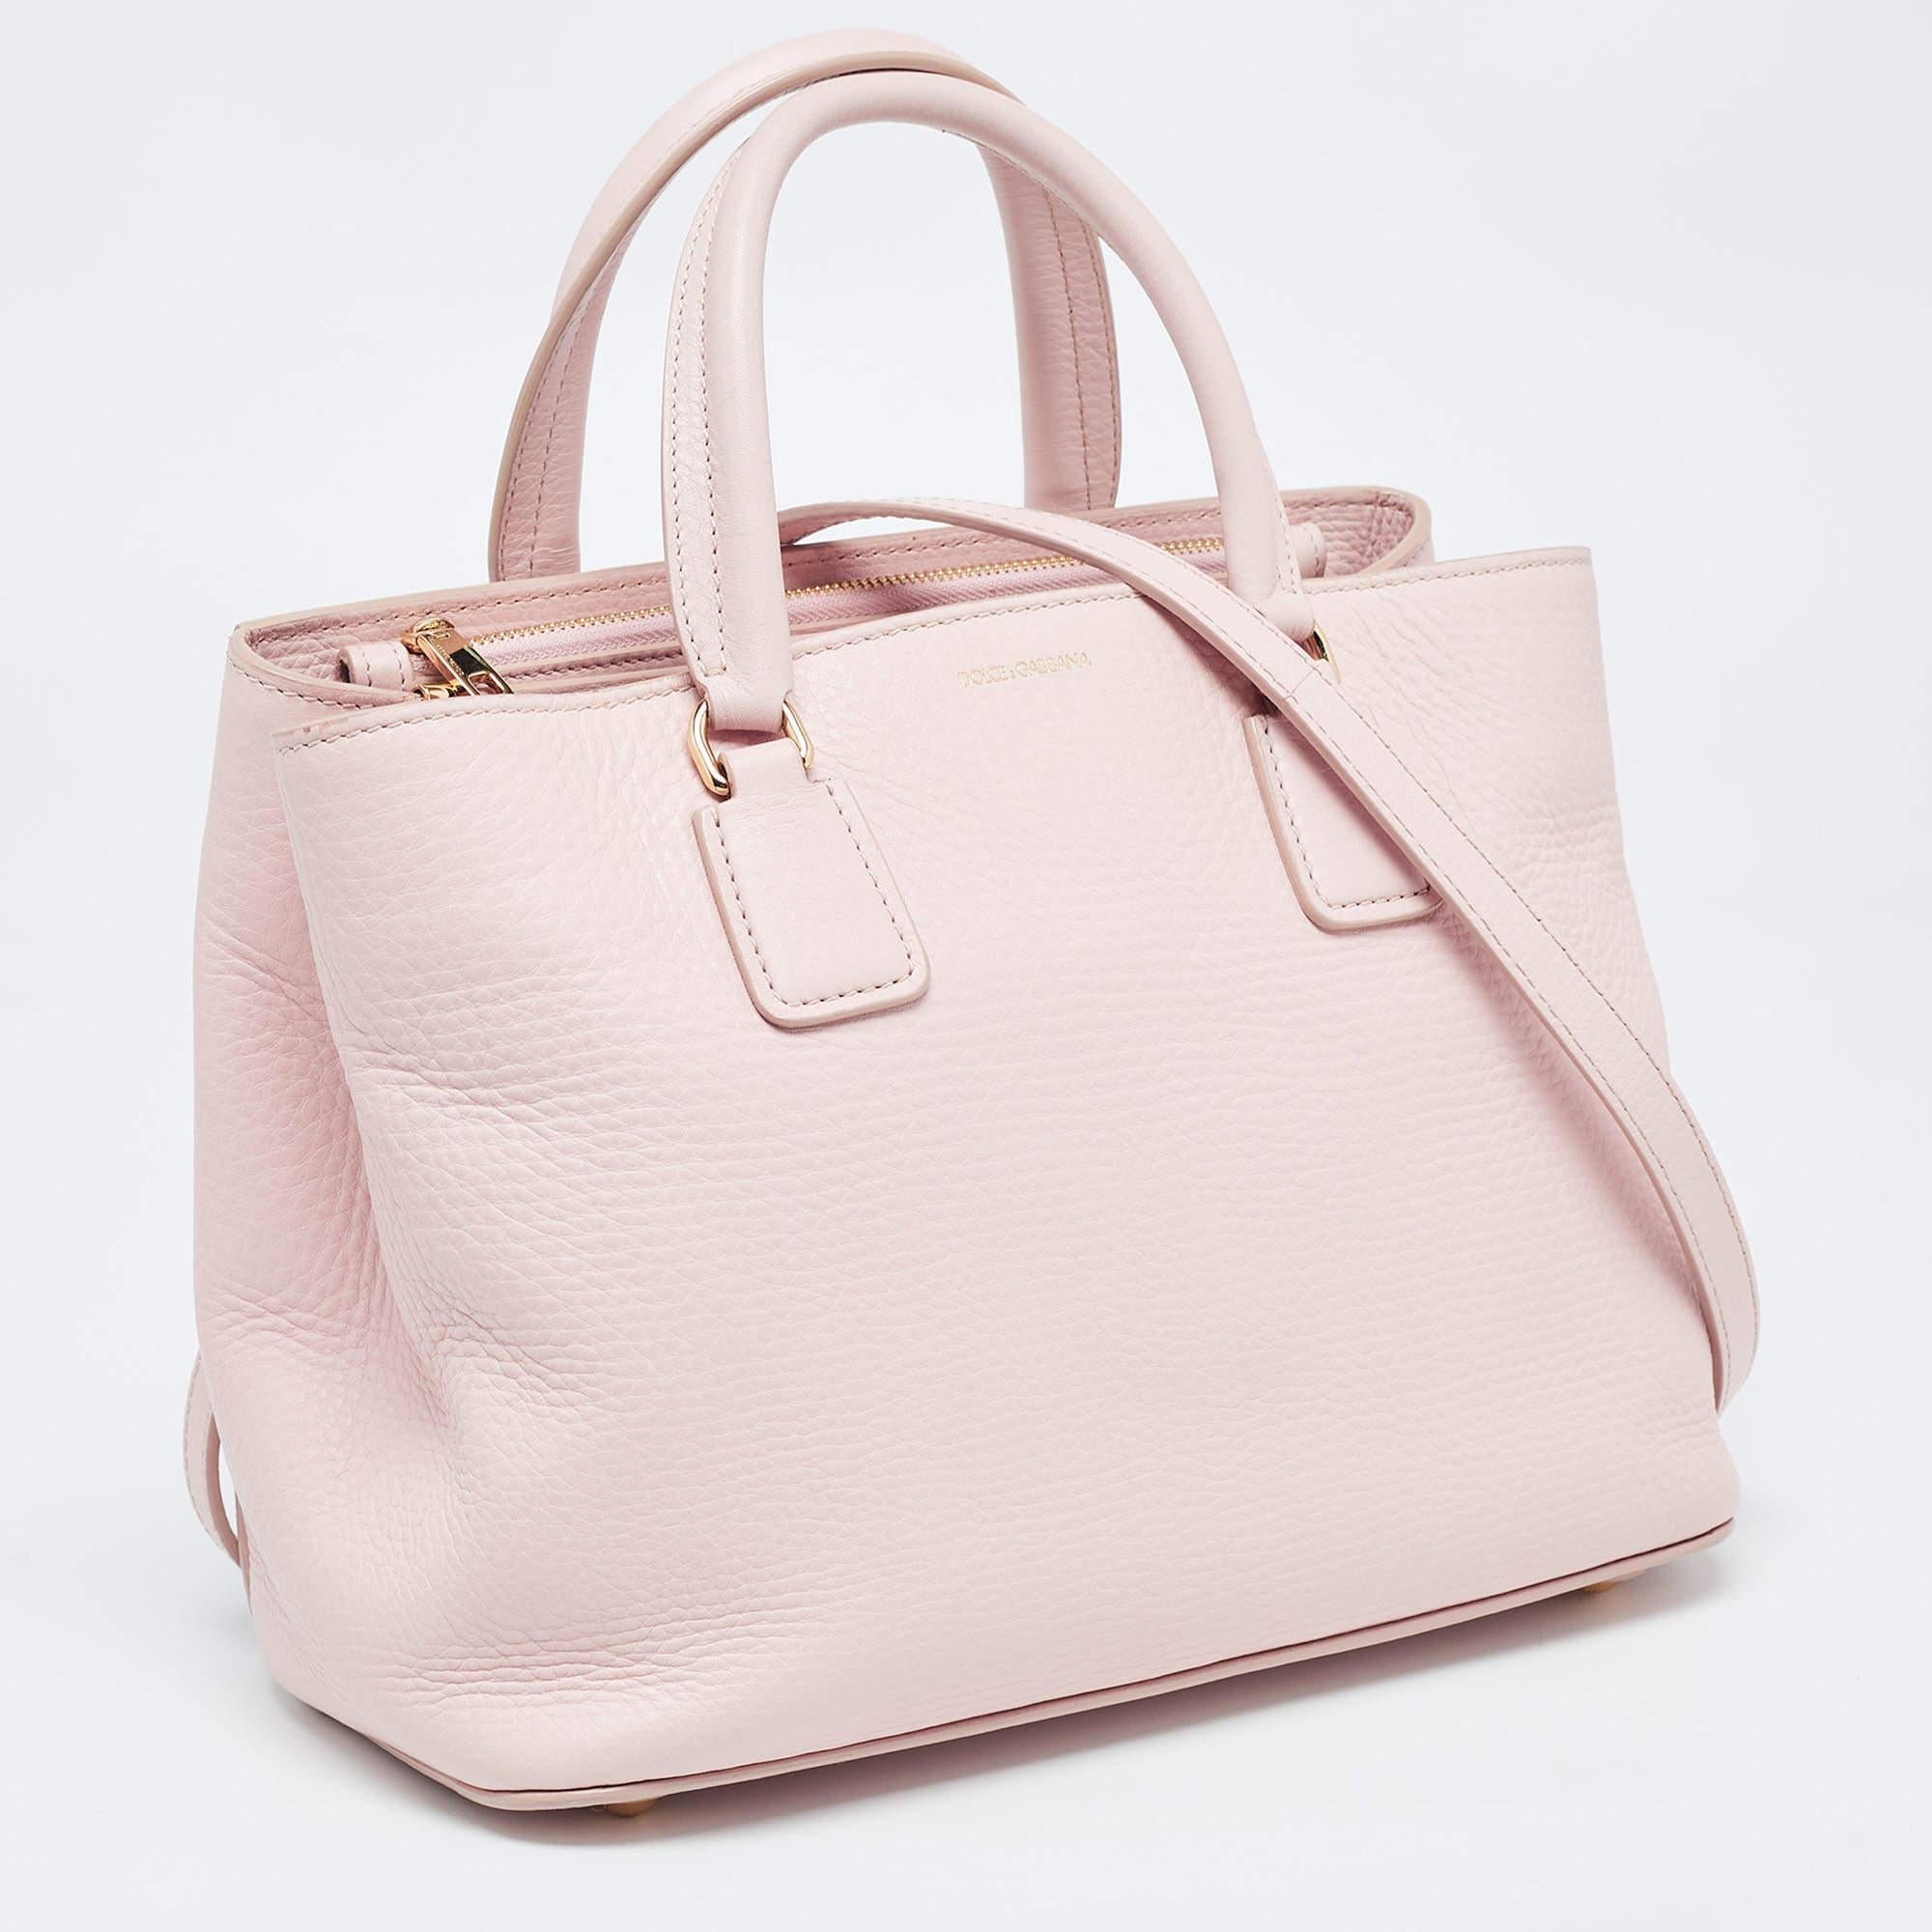 Women's Dolce & Gabbana Pink Grained Leather Tote